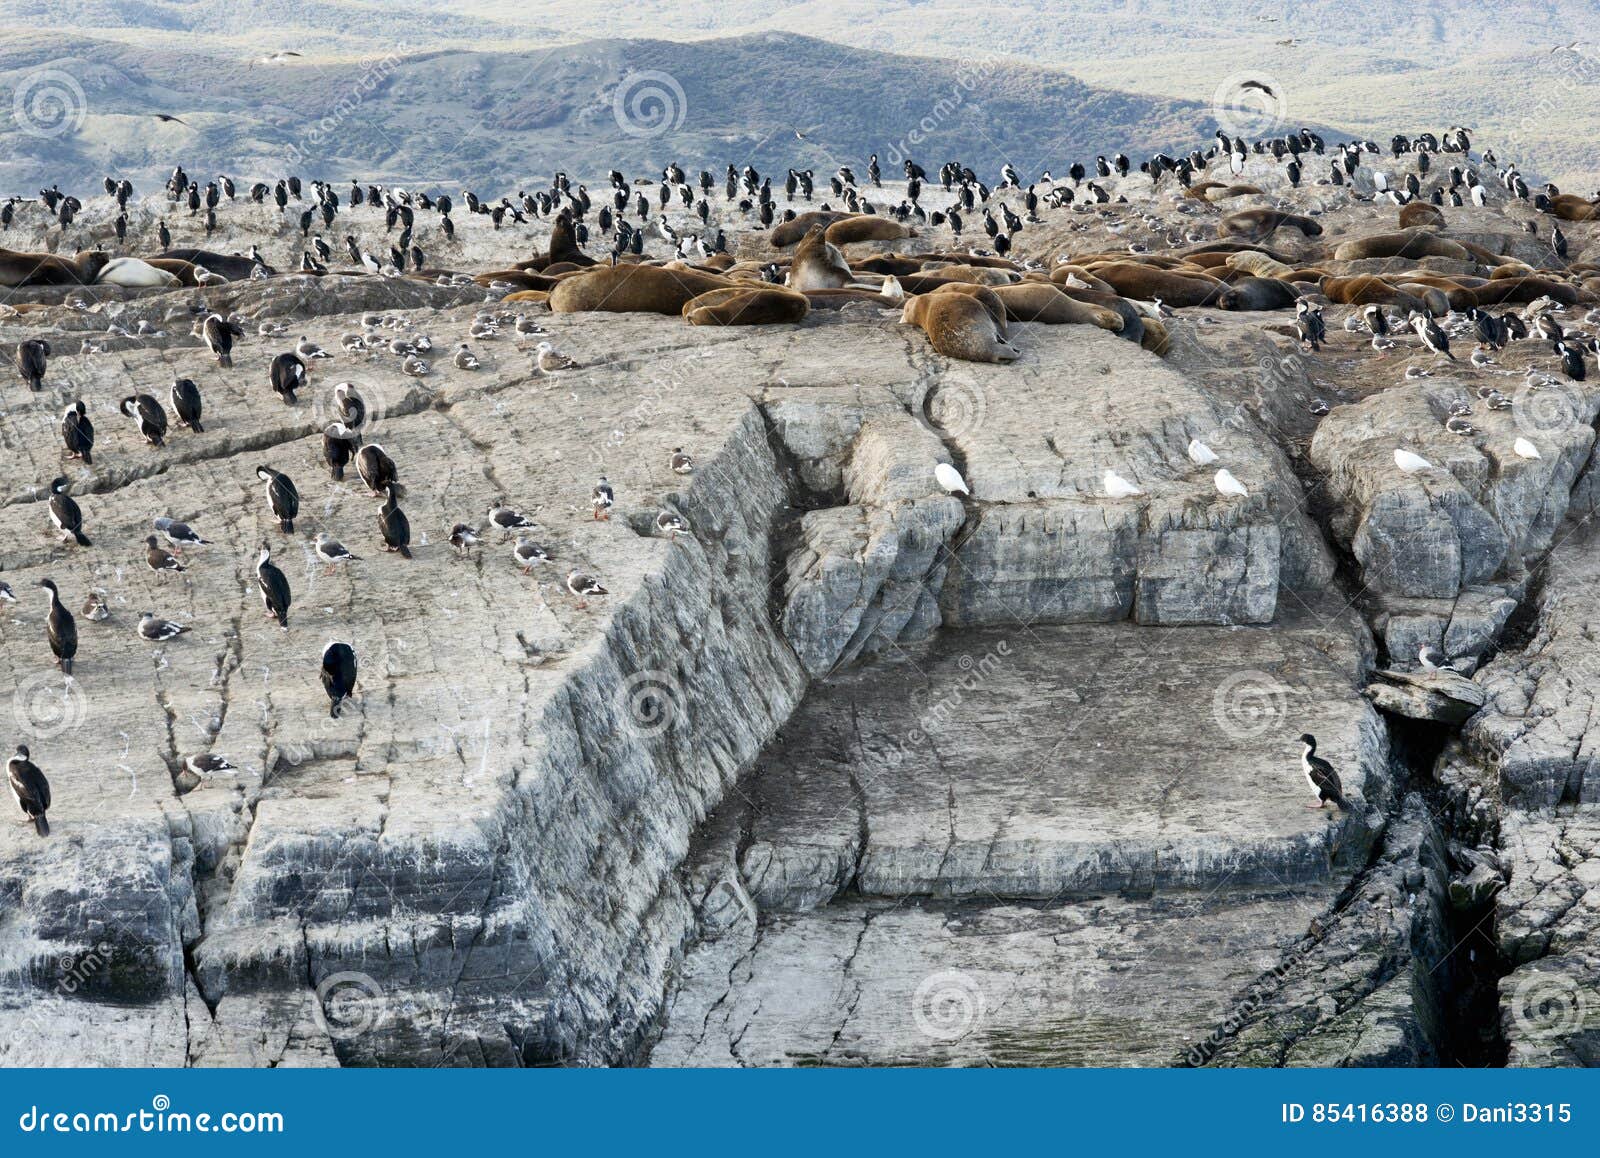 colony of king cormorants and sea lions, beagle channel